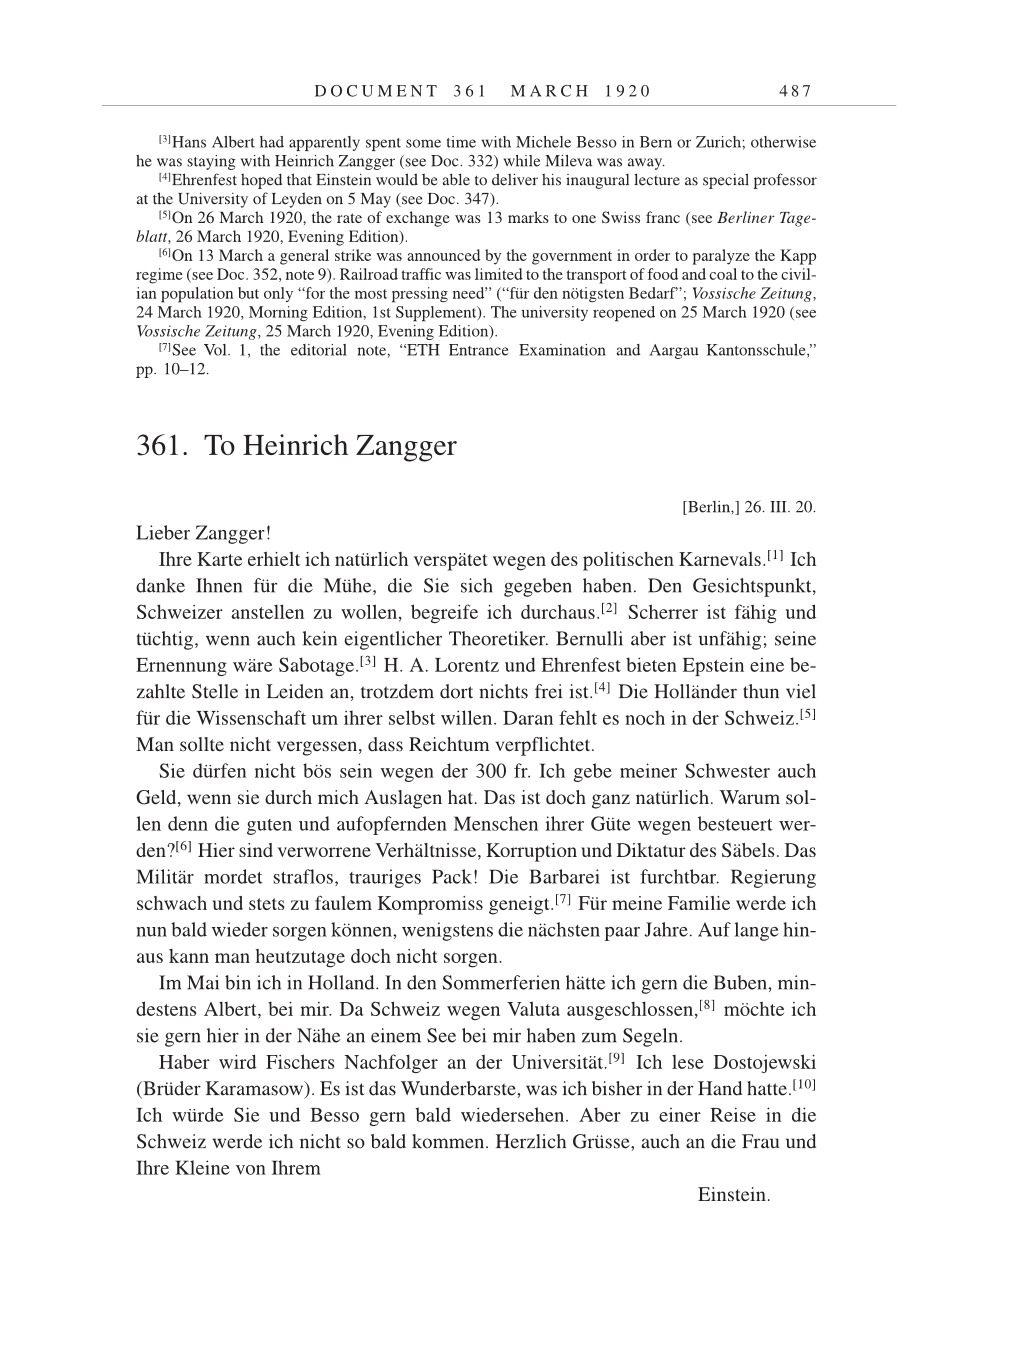 Volume 9: The Berlin Years: Correspondence January 1919-April 1920 page 487